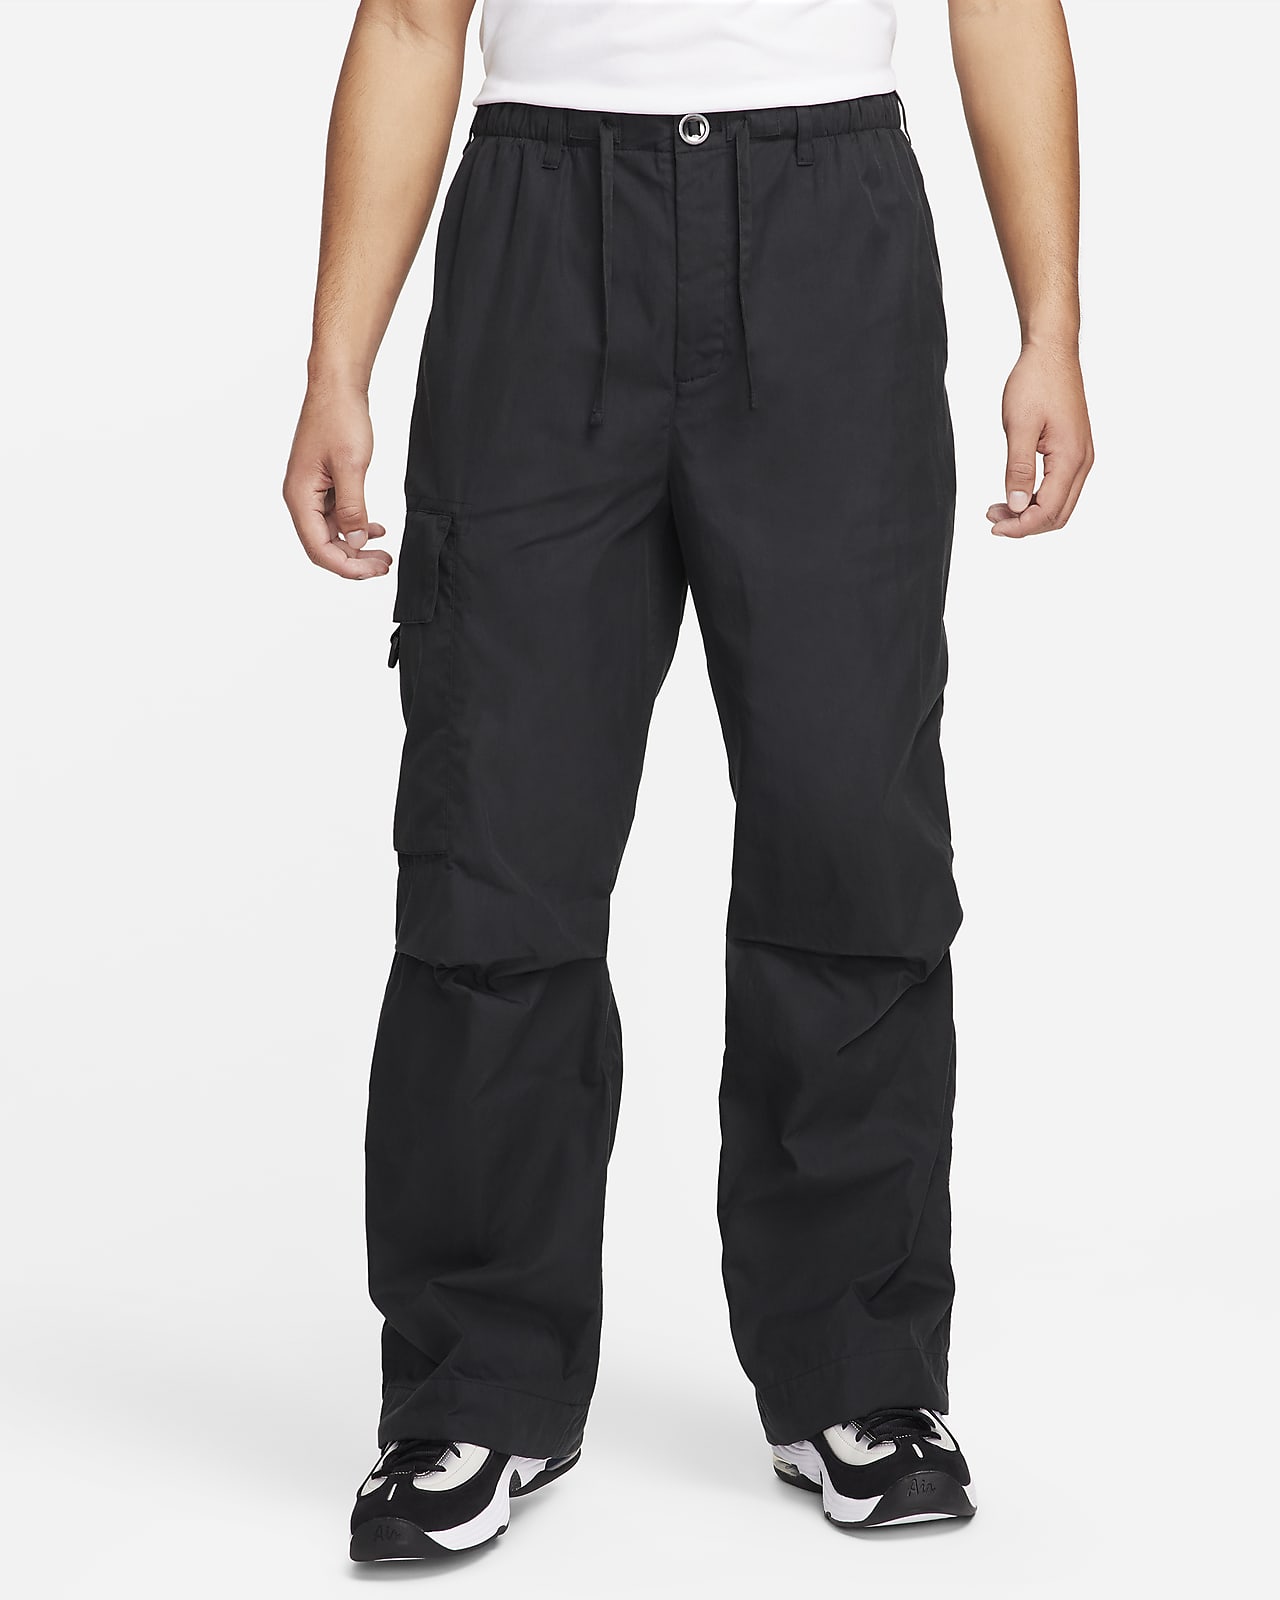 Snap Cargo Pants Army – suite 100